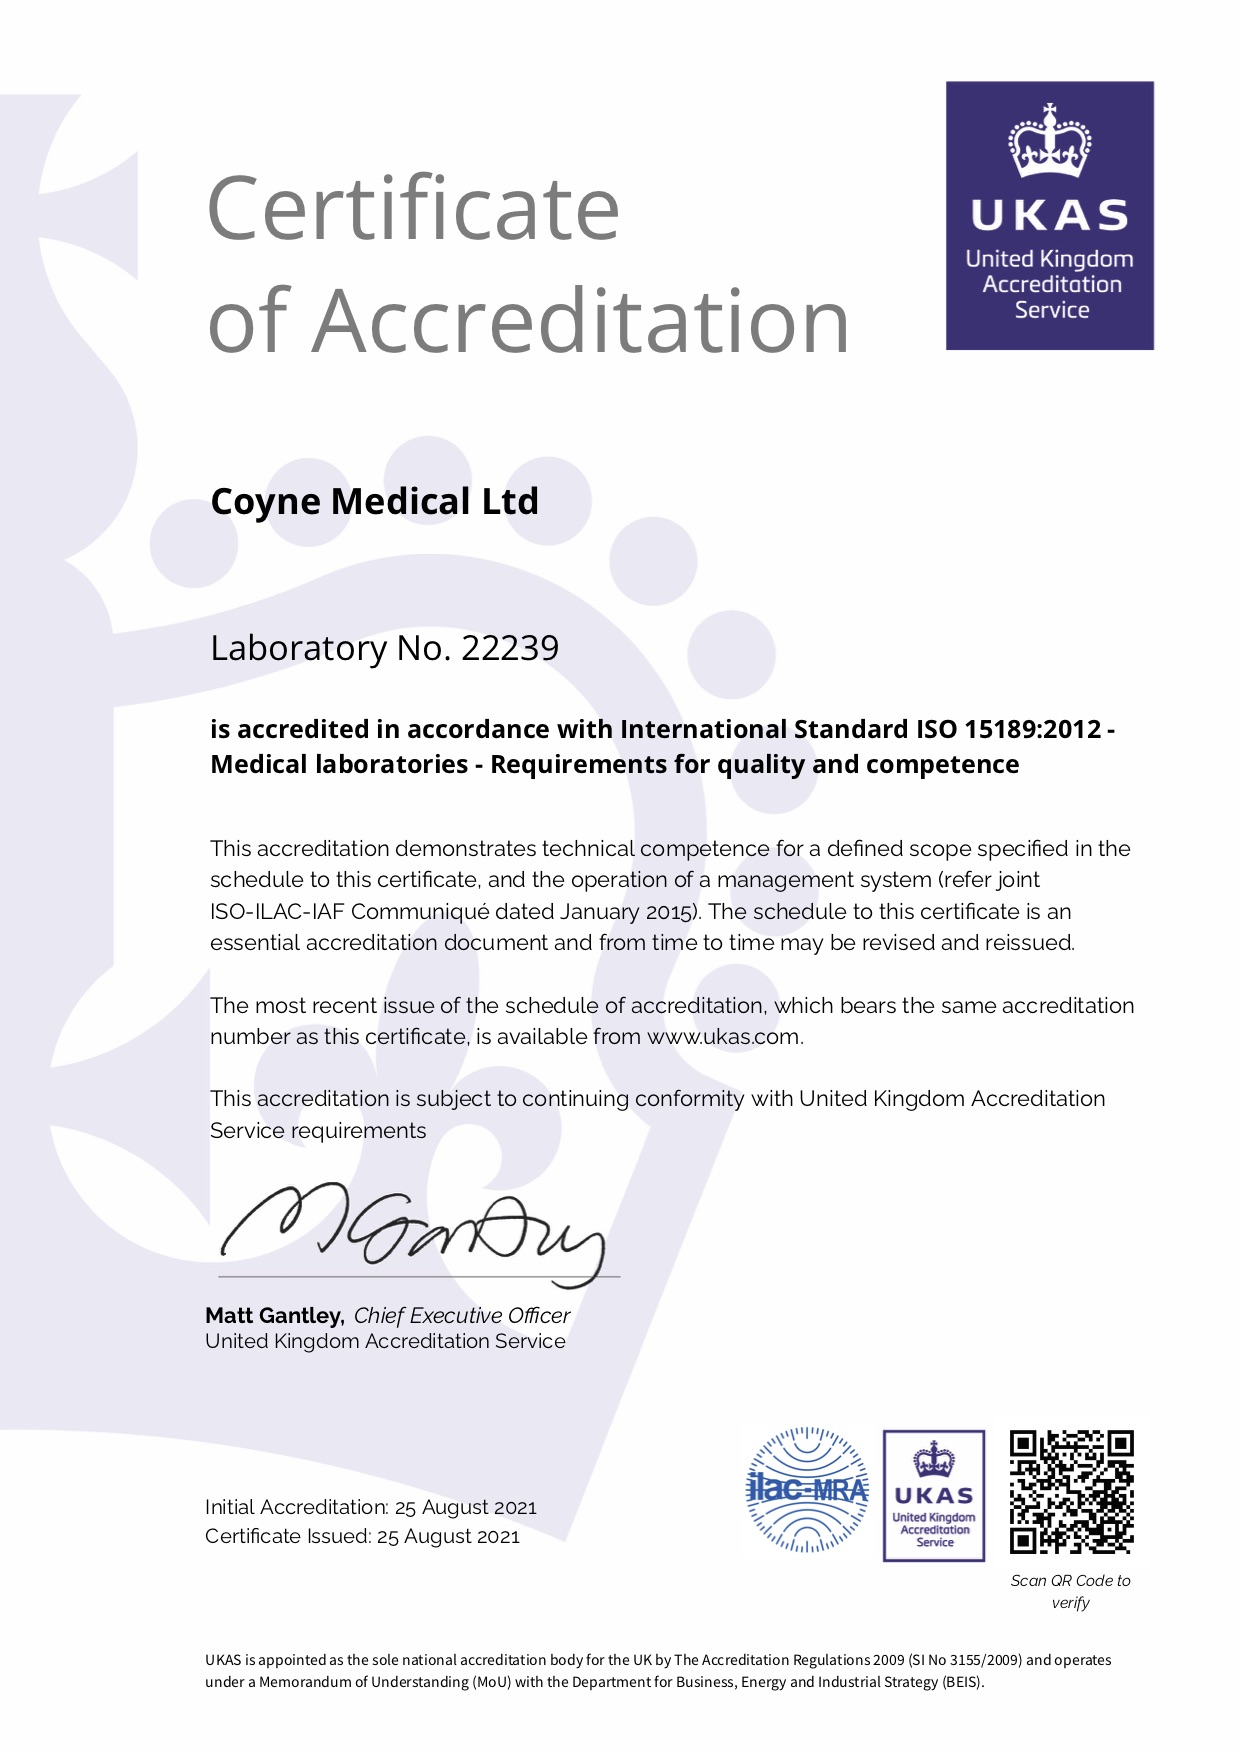 Coyne Medical UKAS Certificate of Accrediation